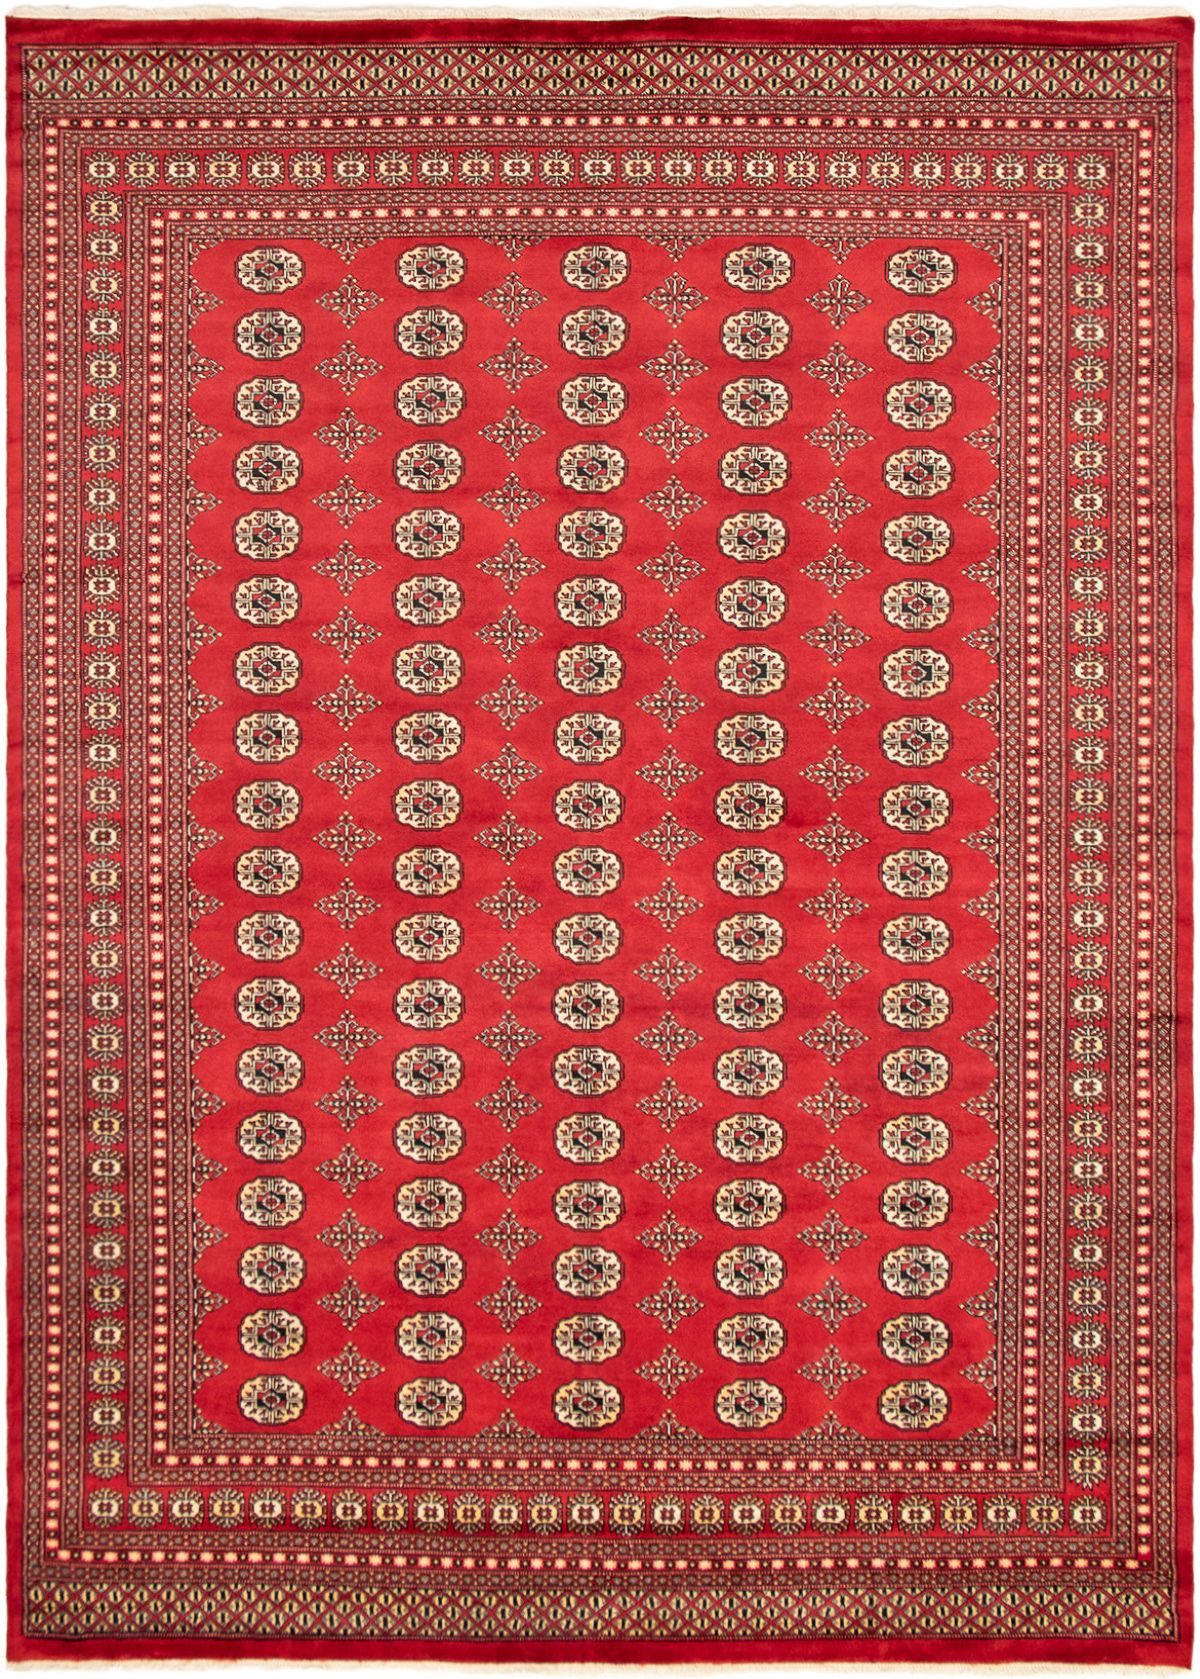 Hand-knotted Finest Peshawar Bokhara Red Wool Rug 8'2" x 9'11" Size: 8'2" x 9'11"  